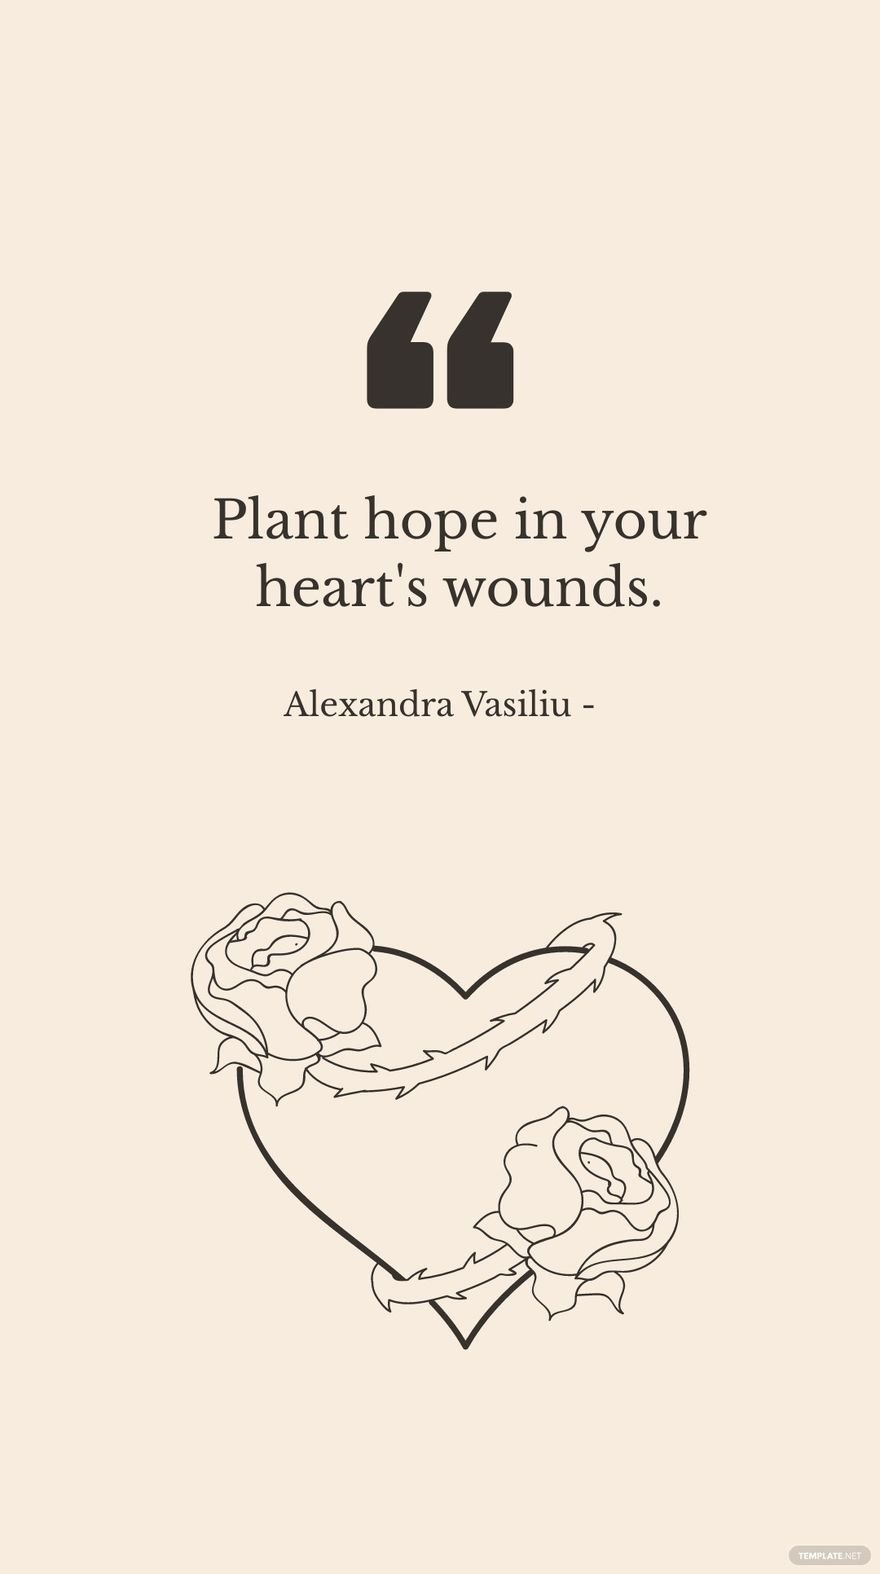 Free Alexandra Vasiliu - Plant hope in your heart's wounds.